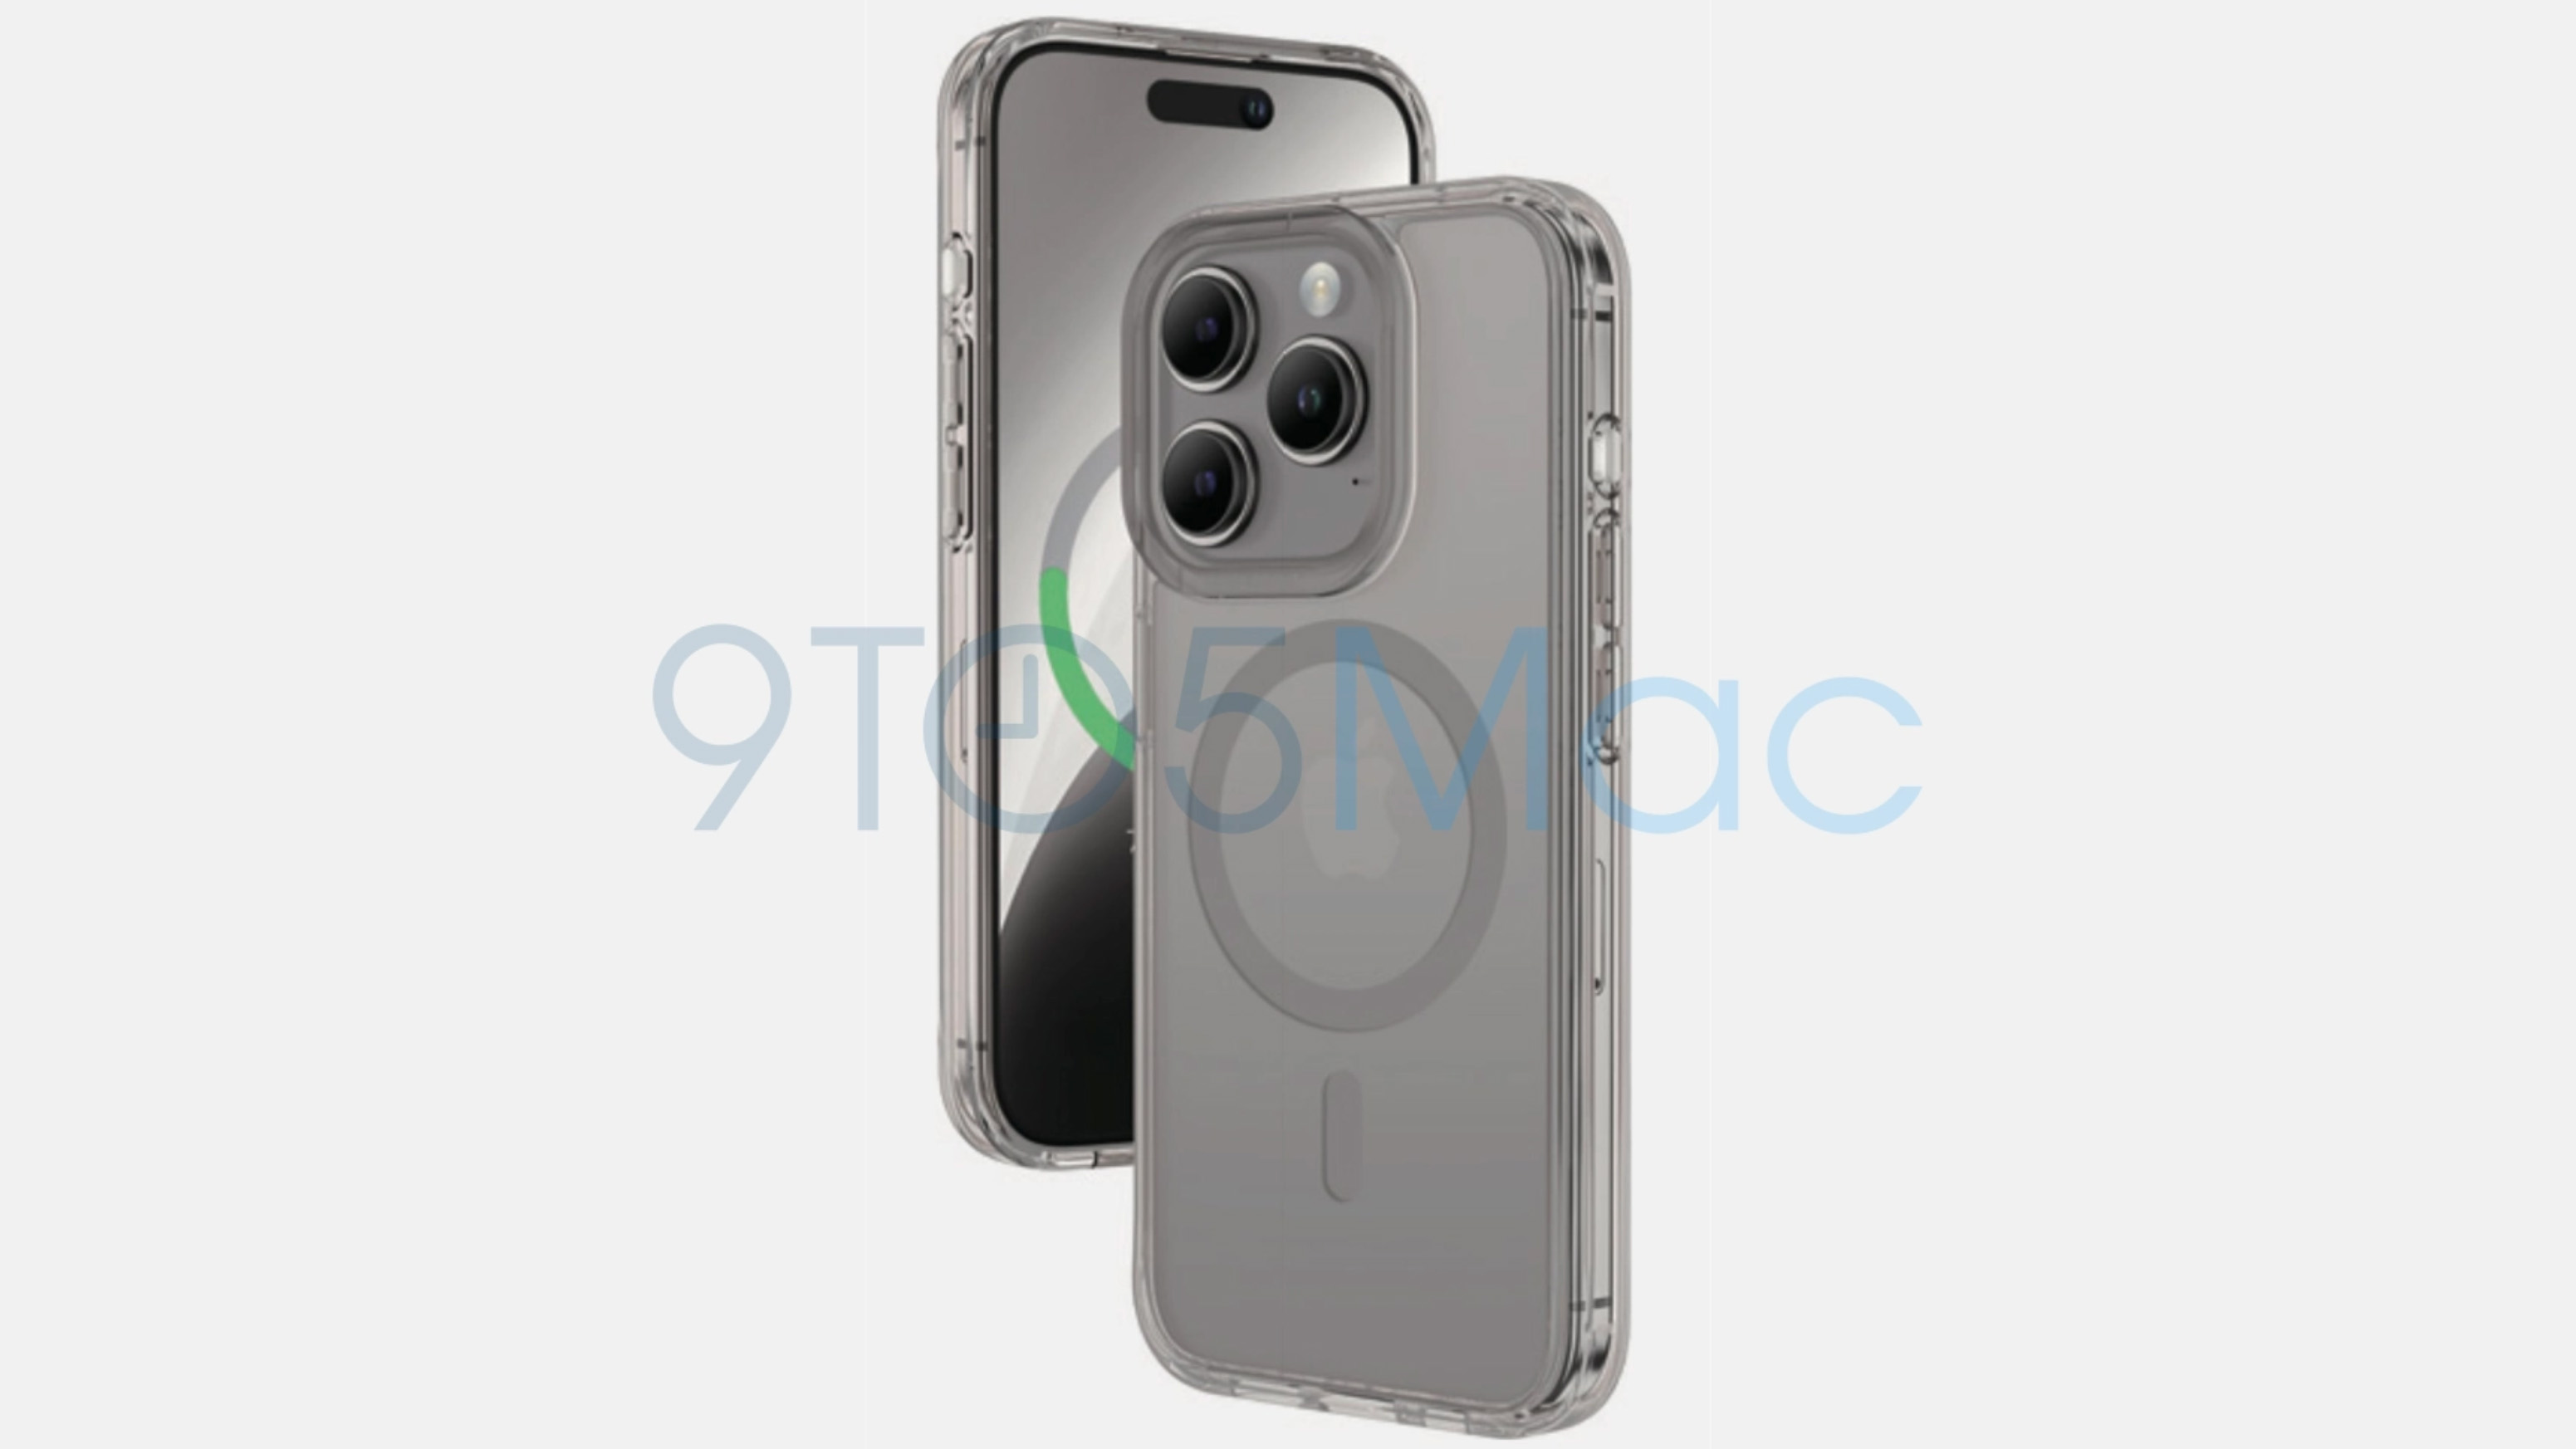 A rendering of the alleged iPhone 15 Pro in Titan Gray